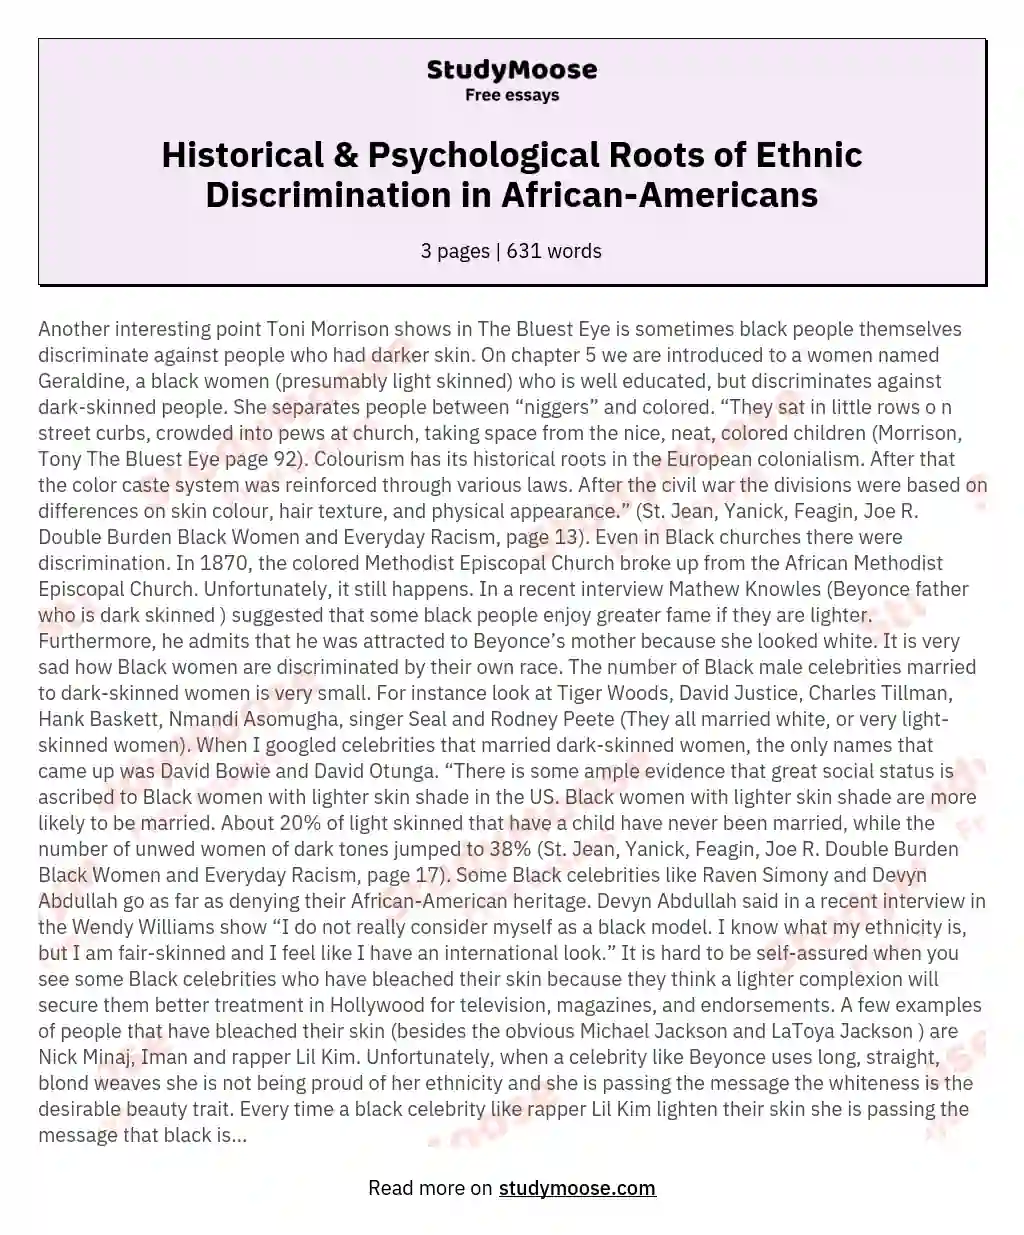 Historical & Psychological Roots of Ethnic Discrimination in African-Americans essay